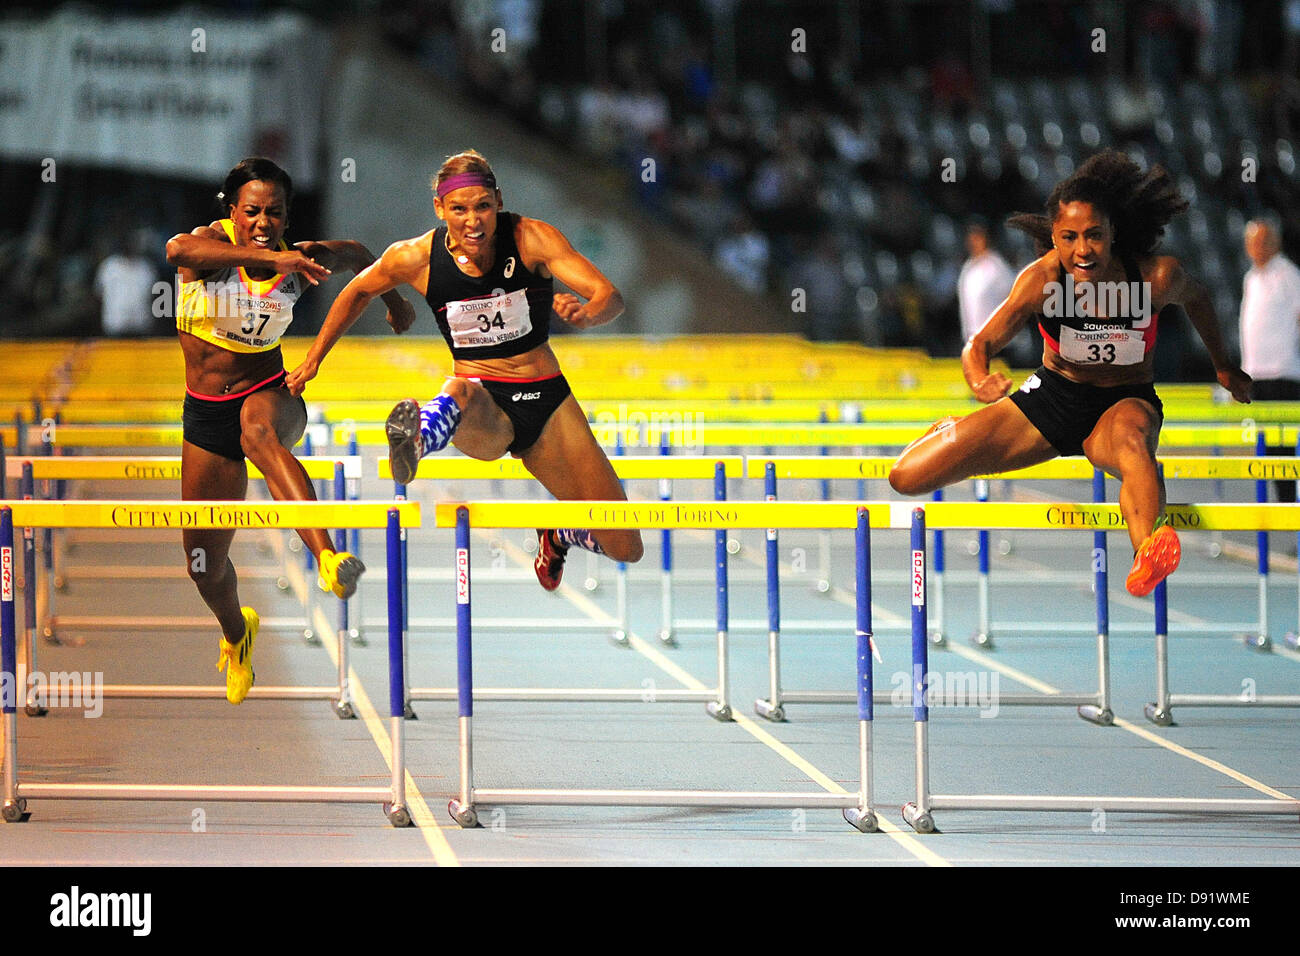 08.06.2013 Torino, Italy. Queen Harrison of the USA wins the Womens 100m hurdles before Lolo Jones of the USA and Tiffany Porter of England during the International Athletics meeting Memorial Primo Nebiolo from the Stadio Primo Nebiolo. Stock Photo